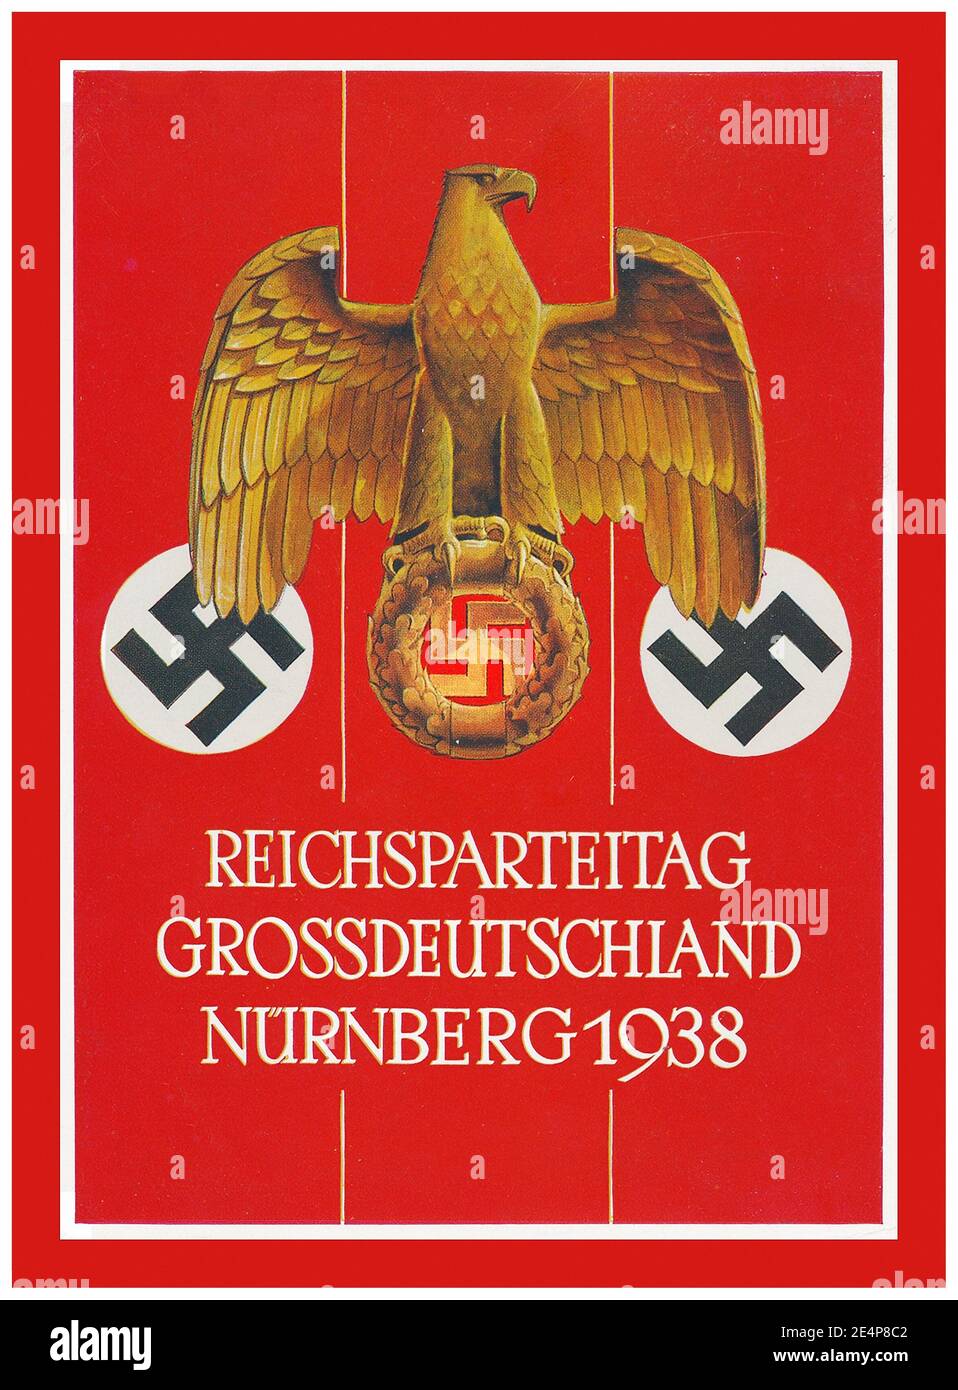 1938 Nazi Nürnberg propaganda 'Nazi Party Congress' Reichsparteitag poster card illustration Greater Germany German imperial eagle with Nazi swastika, Verlag Photo-Hoffmann Company Stock Photo